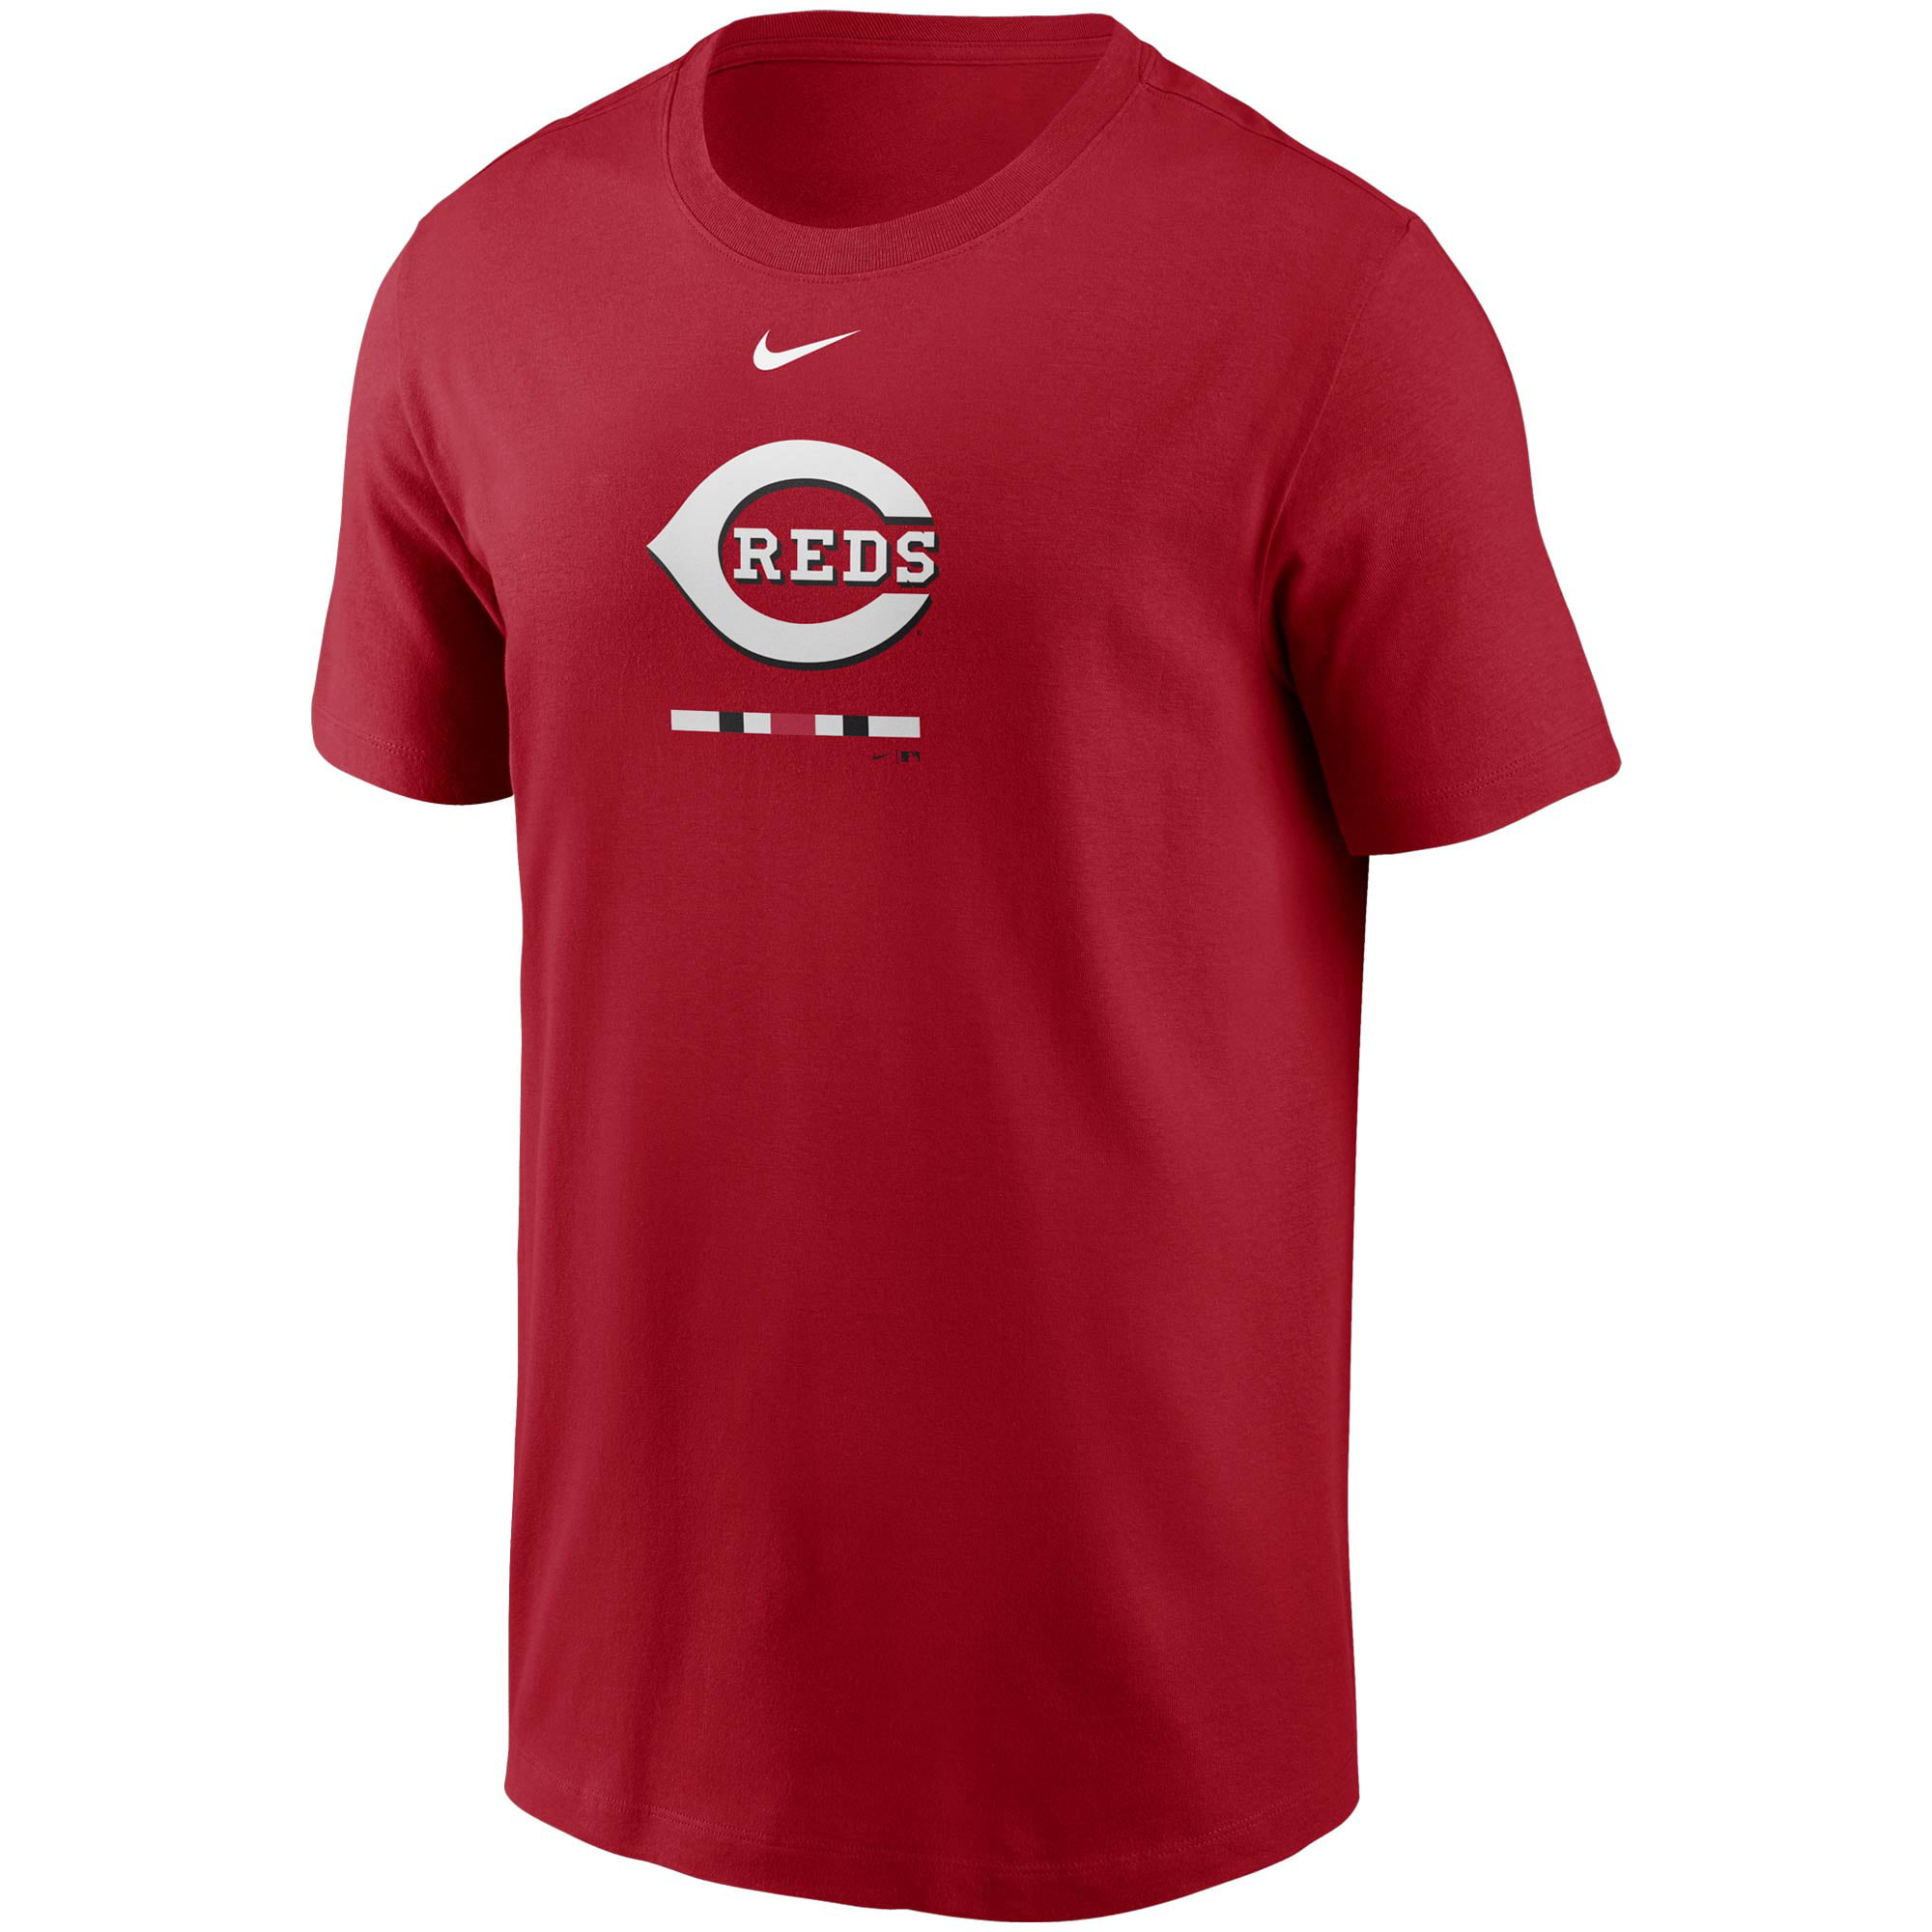 be the reds t shirt